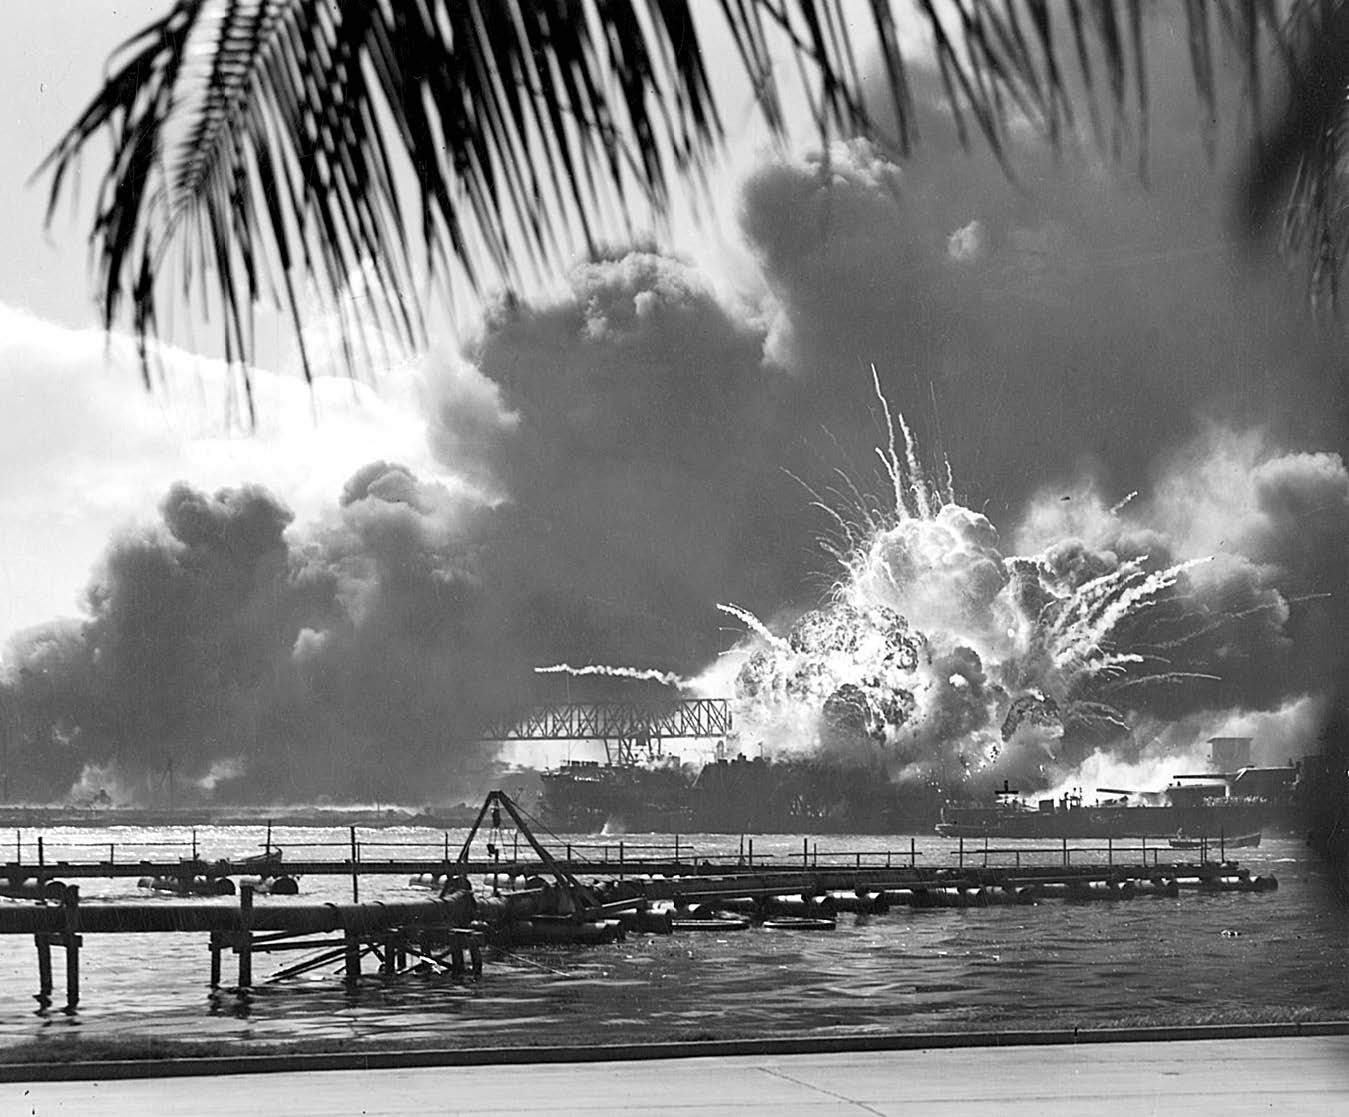 Only twenty nautical miles from the temple, the attack on Pearl Harbor drastically altered life in Hawai‘i. Six weeks later, amid minimal normalcy, Church meetings resumed, along with reduced temple sessions. Courtesy of Wikimedia Commons.